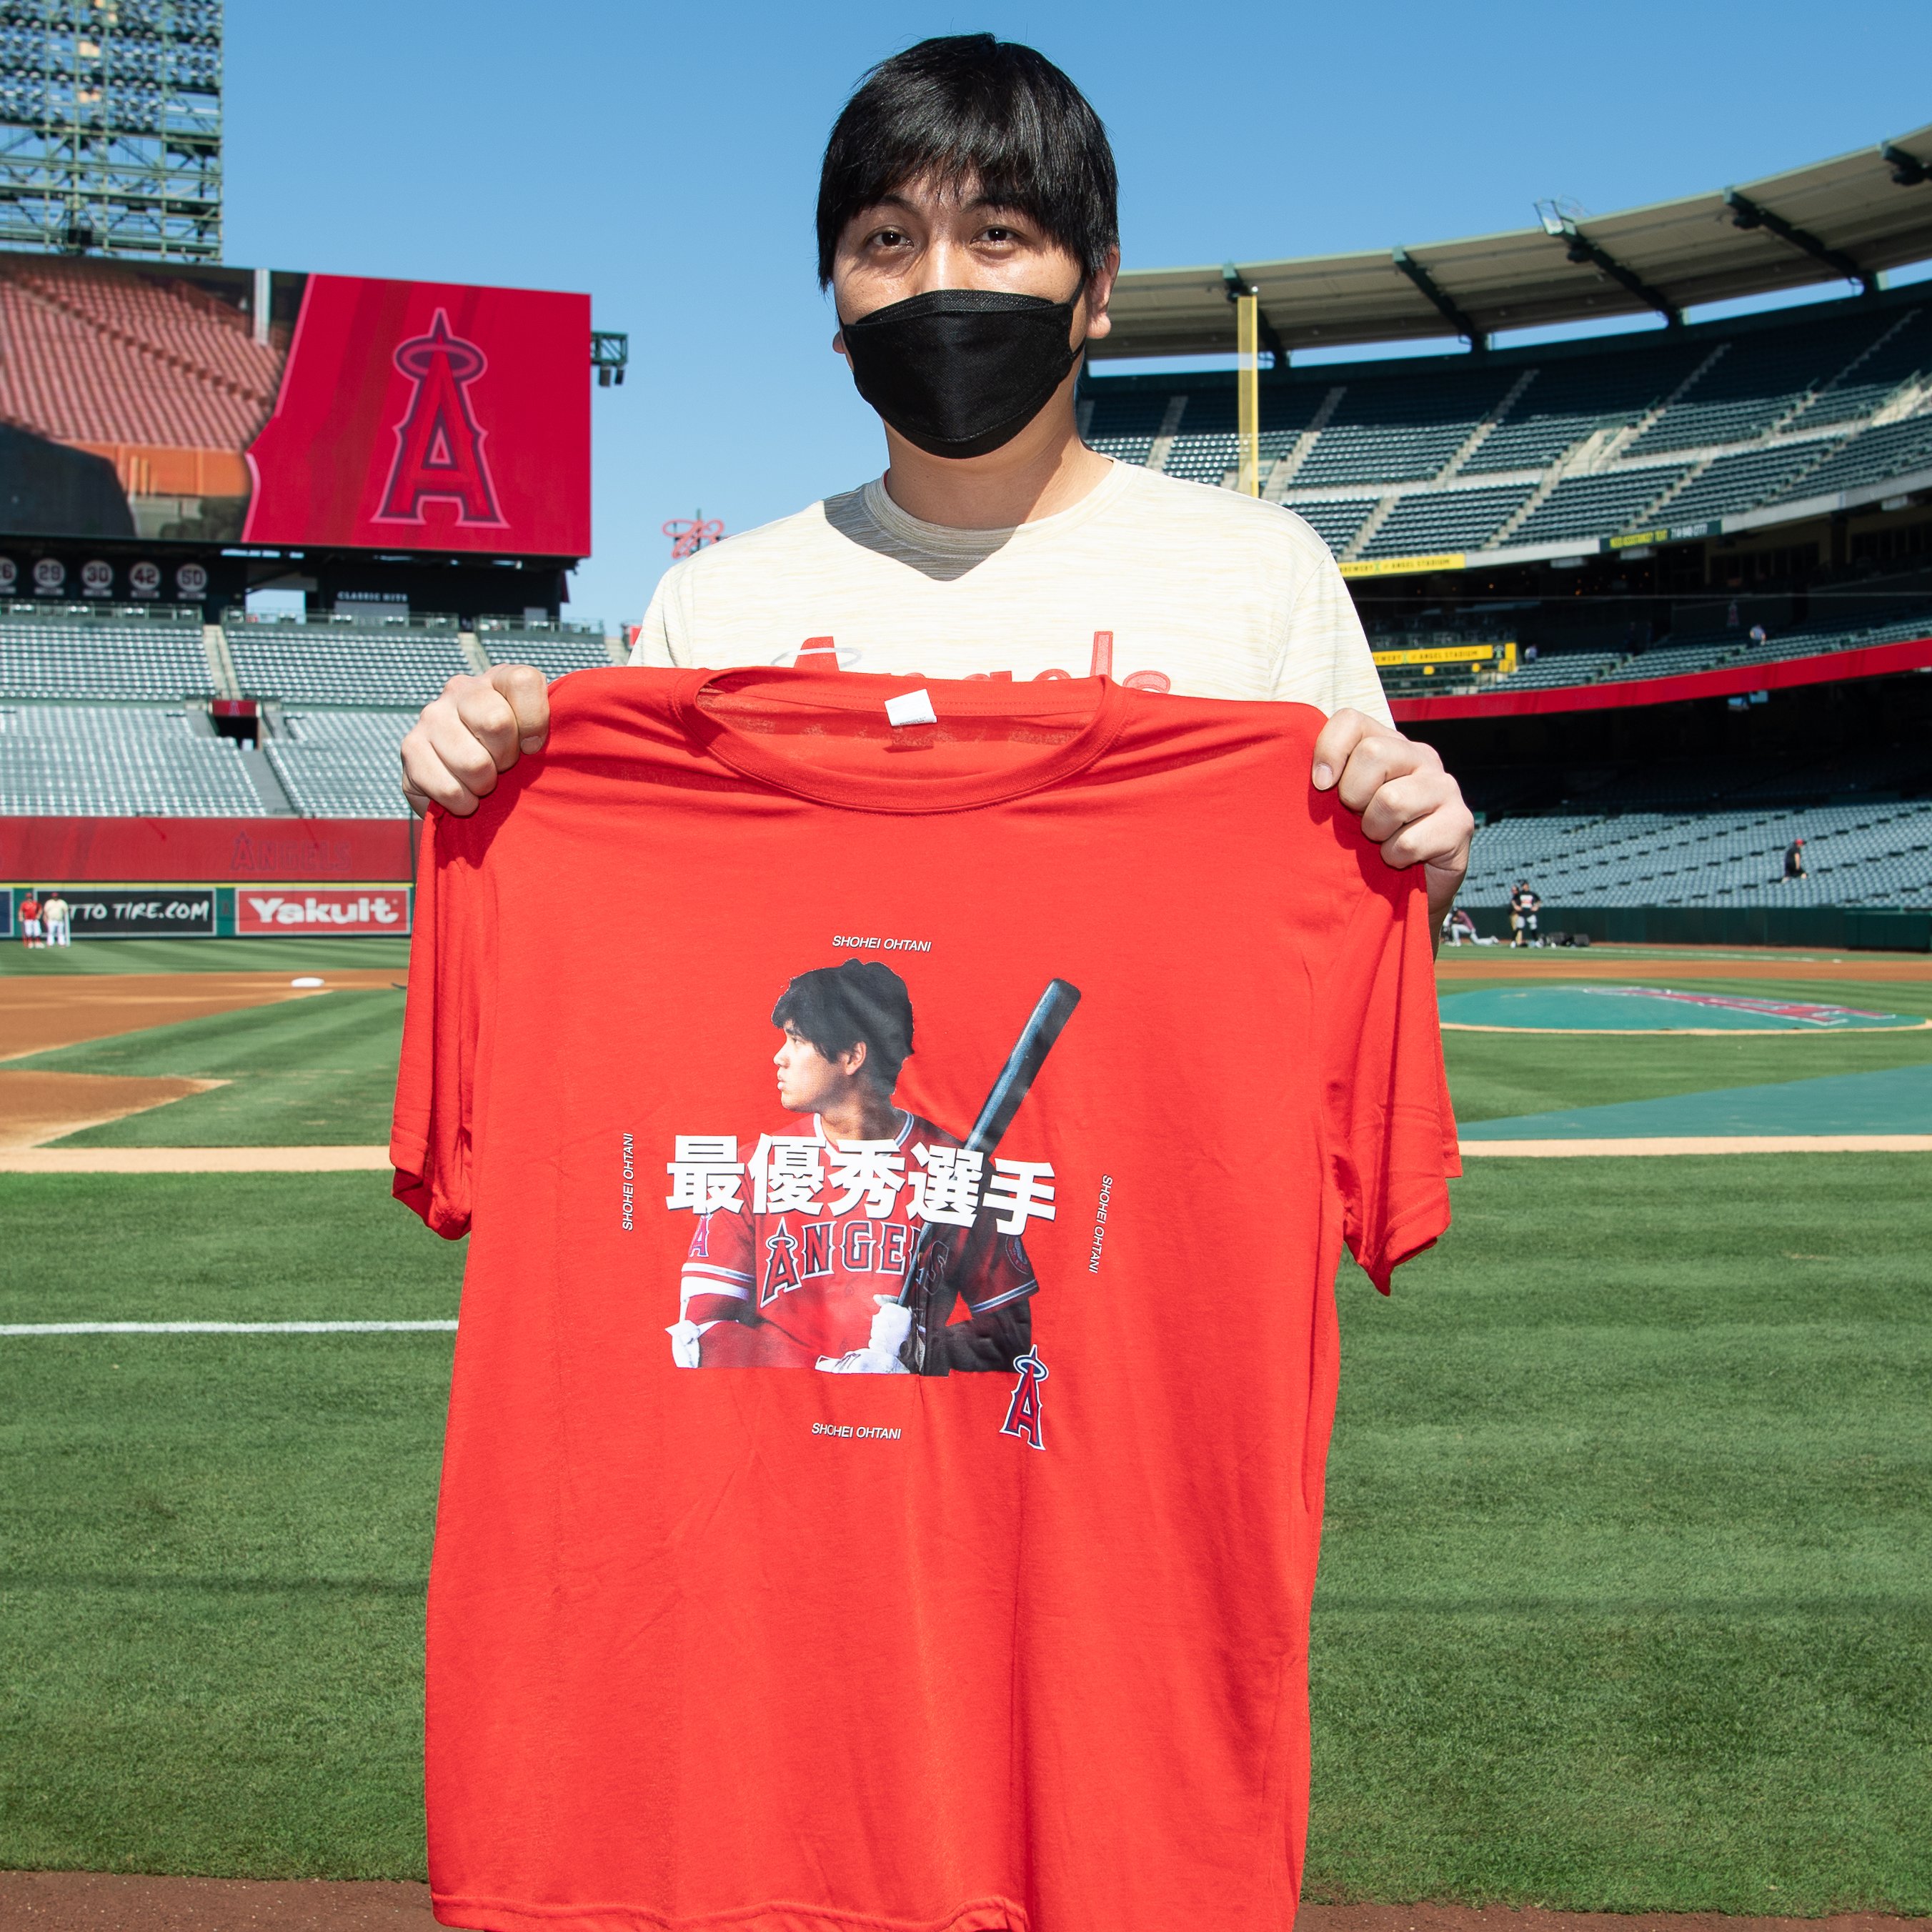 New month, new giveaways! Head to - Los Angeles Angels